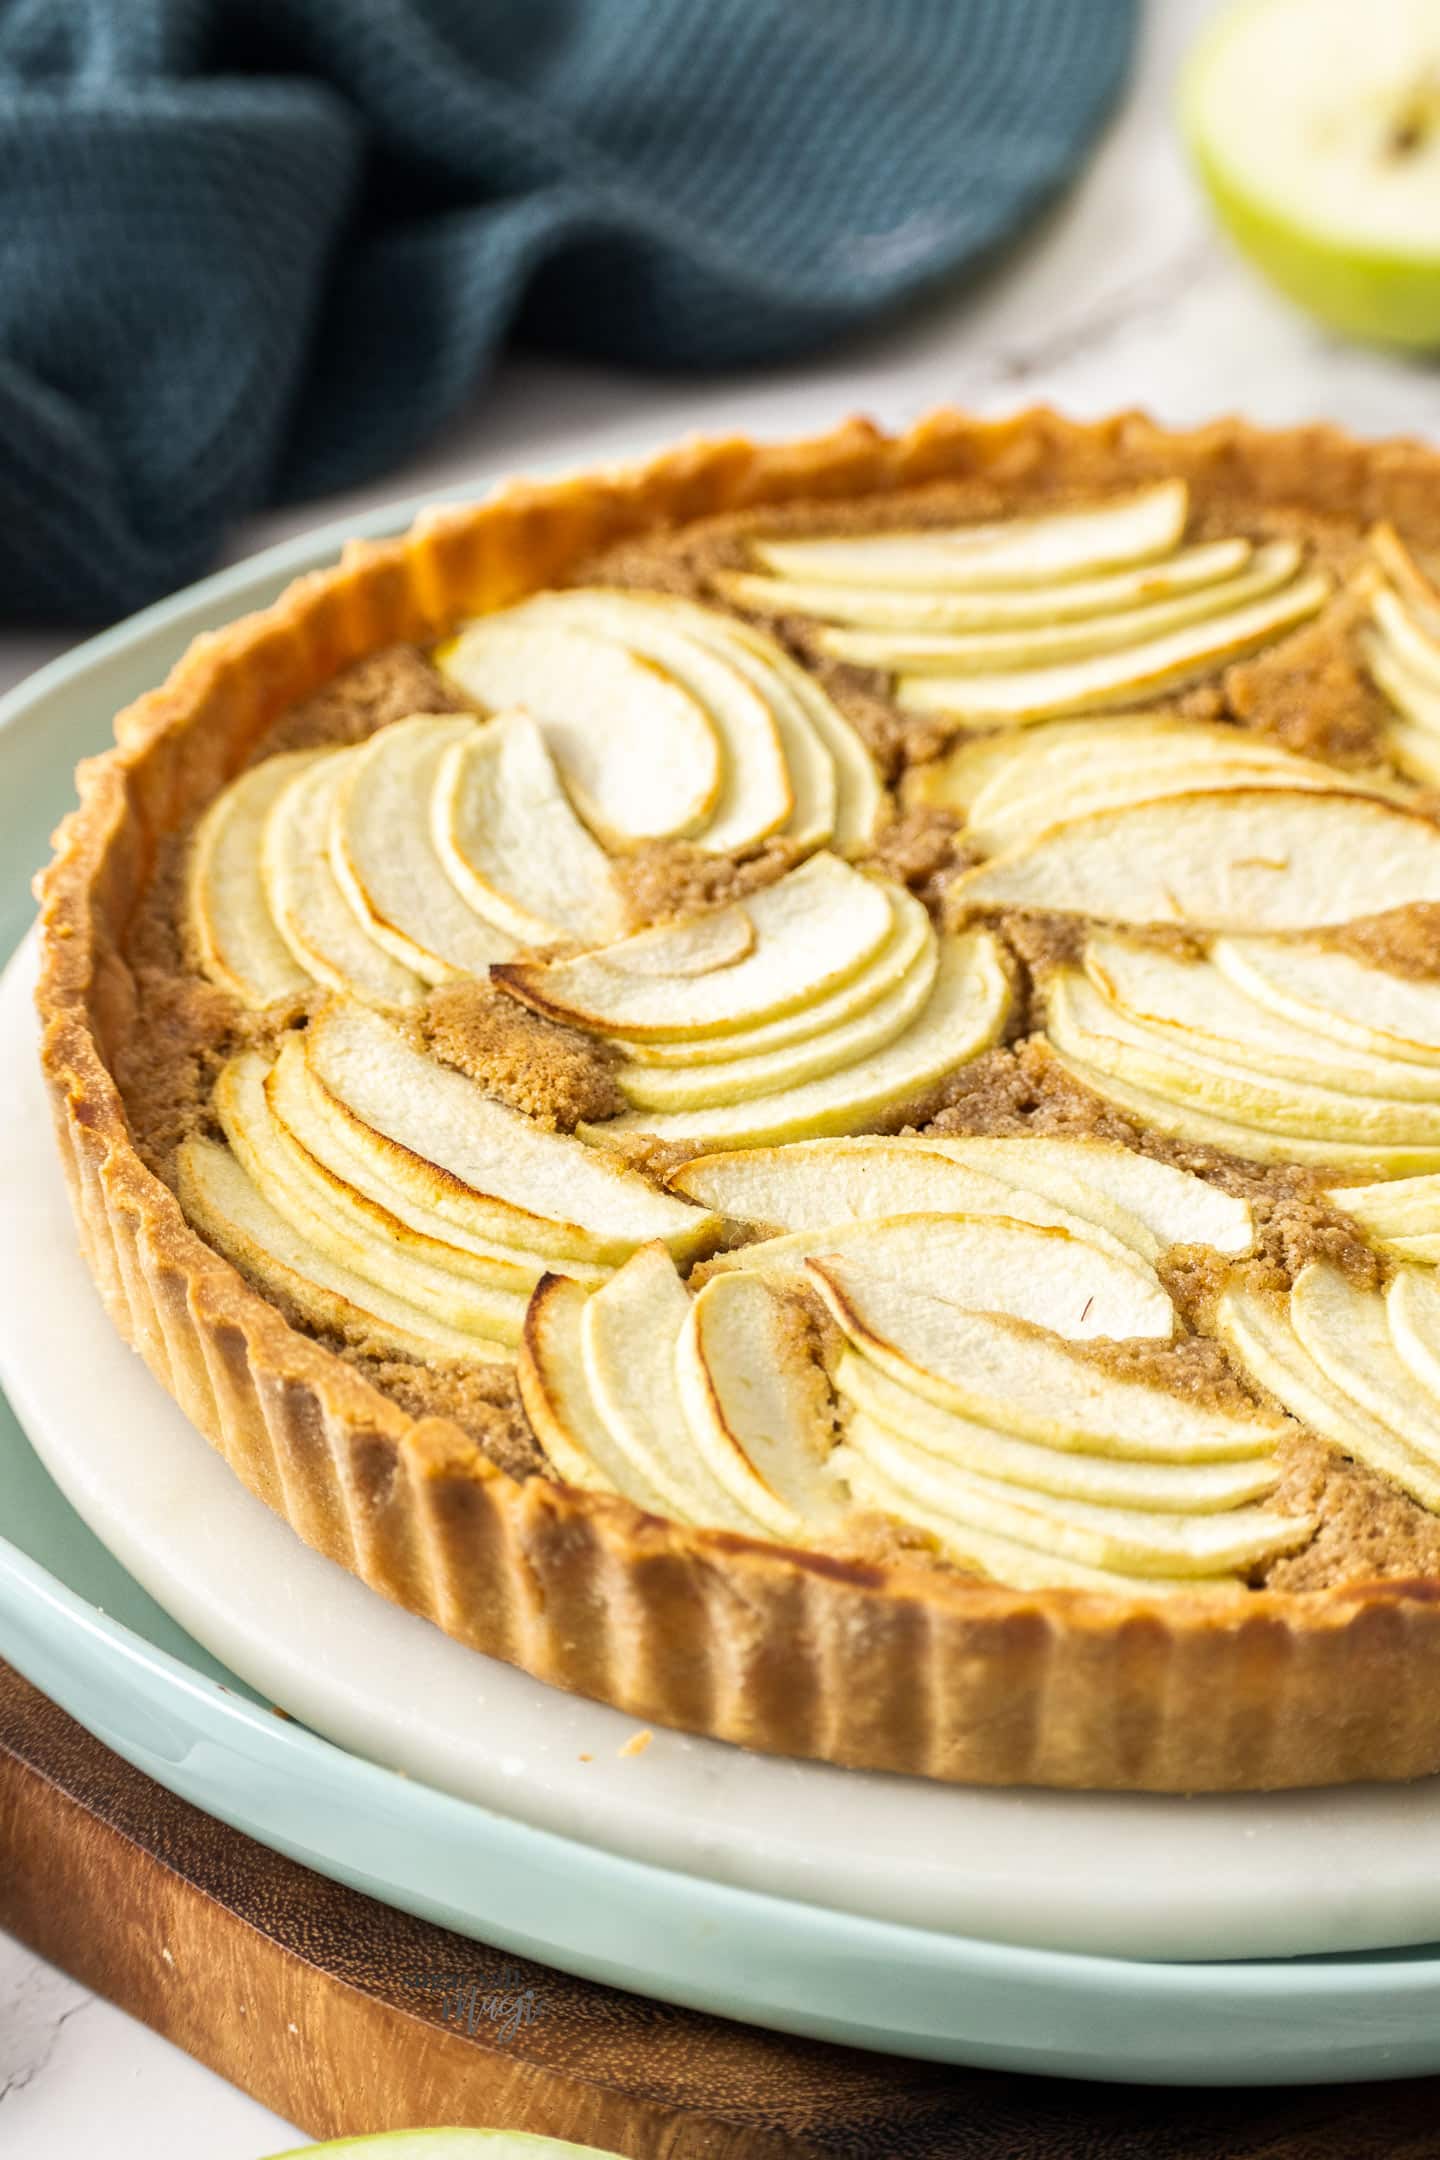 Closeup of the apple slices on top of the tart.